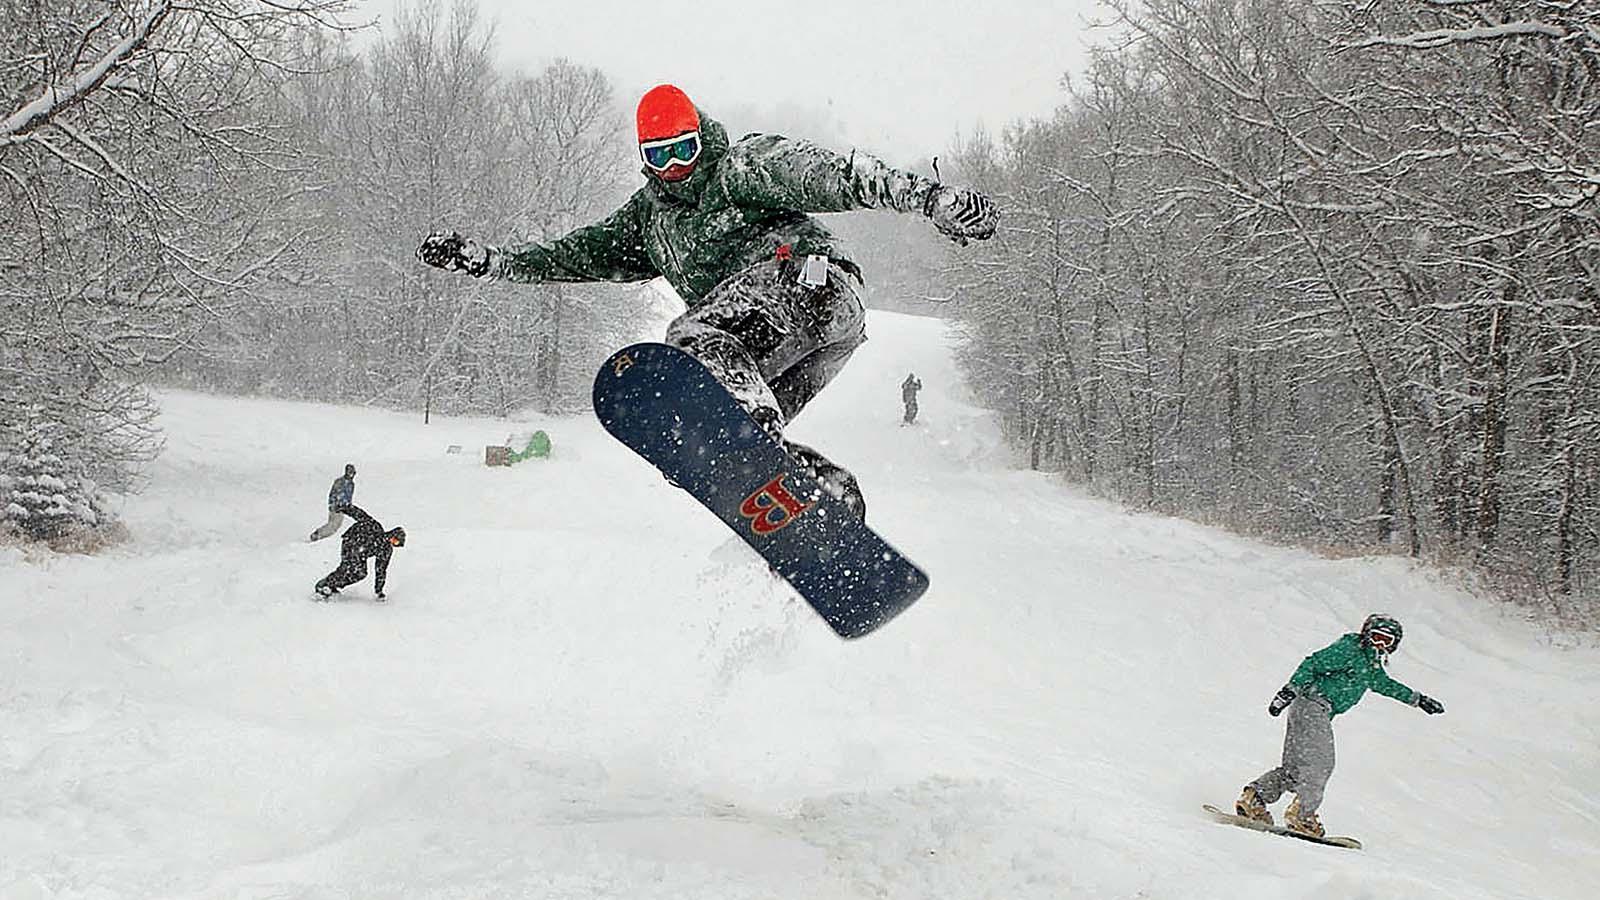 Snowboarder hitting a big jump at Huff Hills with several others snowboarding behind him